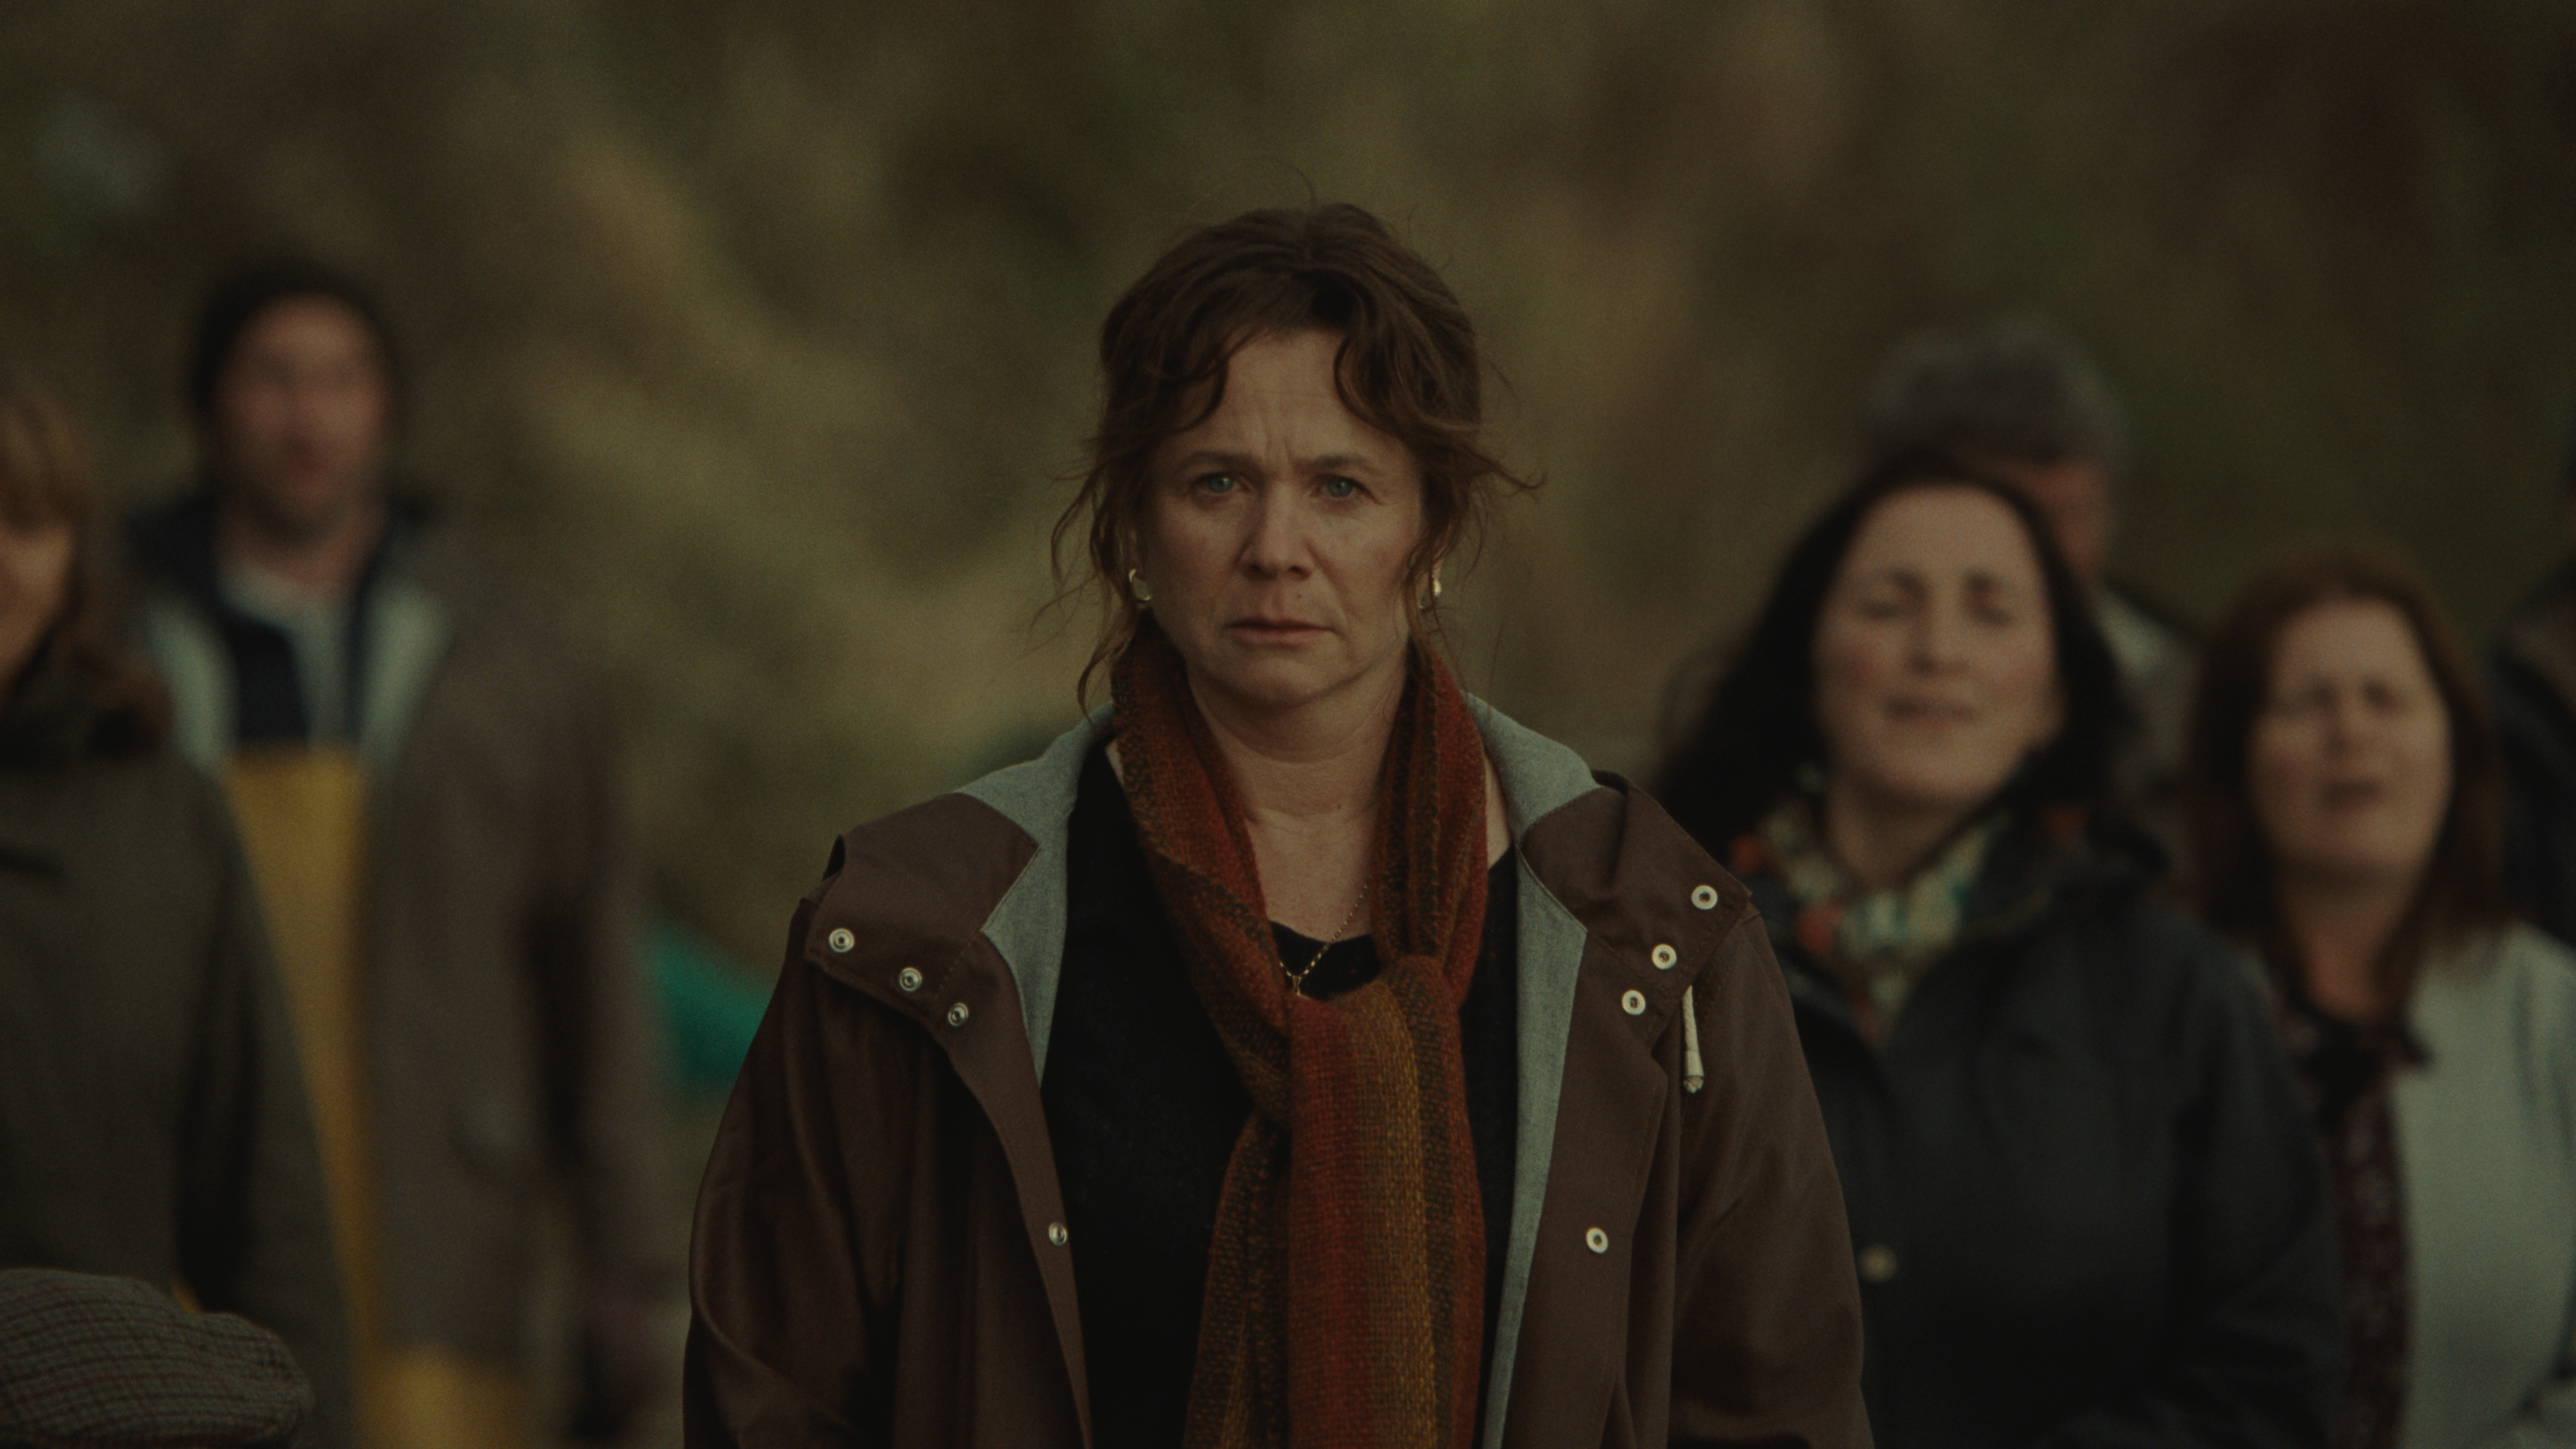 Emily Watson in "God’s Creatures" (Courtesy of A24)